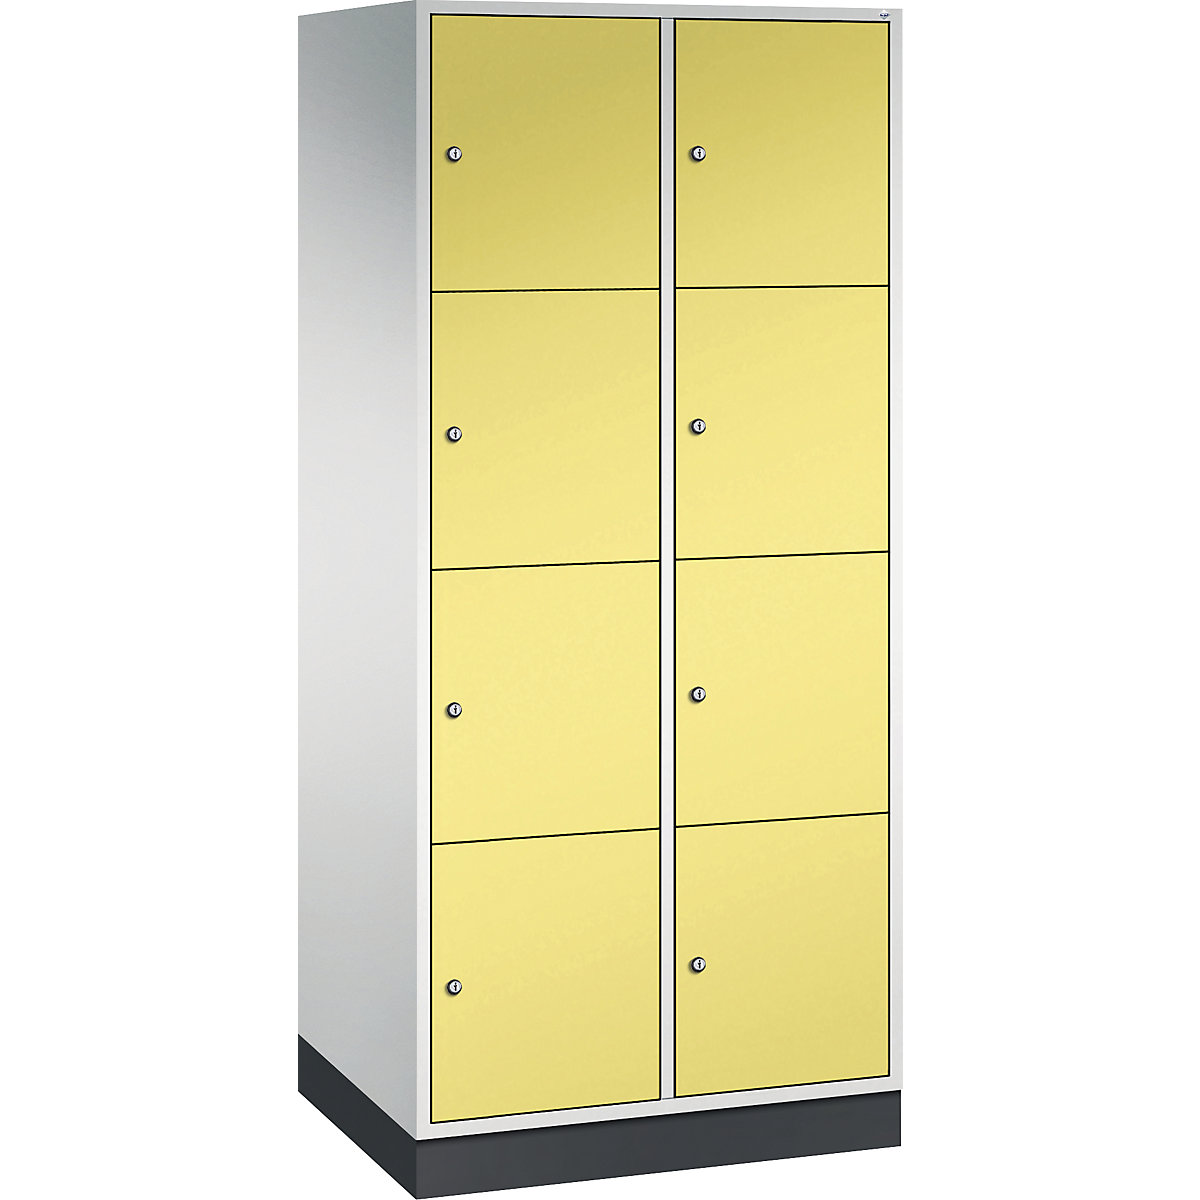 INTRO steel compartment locker, compartment height 435 mm – C+P, WxD 820 x 600 mm, 8 compartments, light grey body, sulphur yellow doors